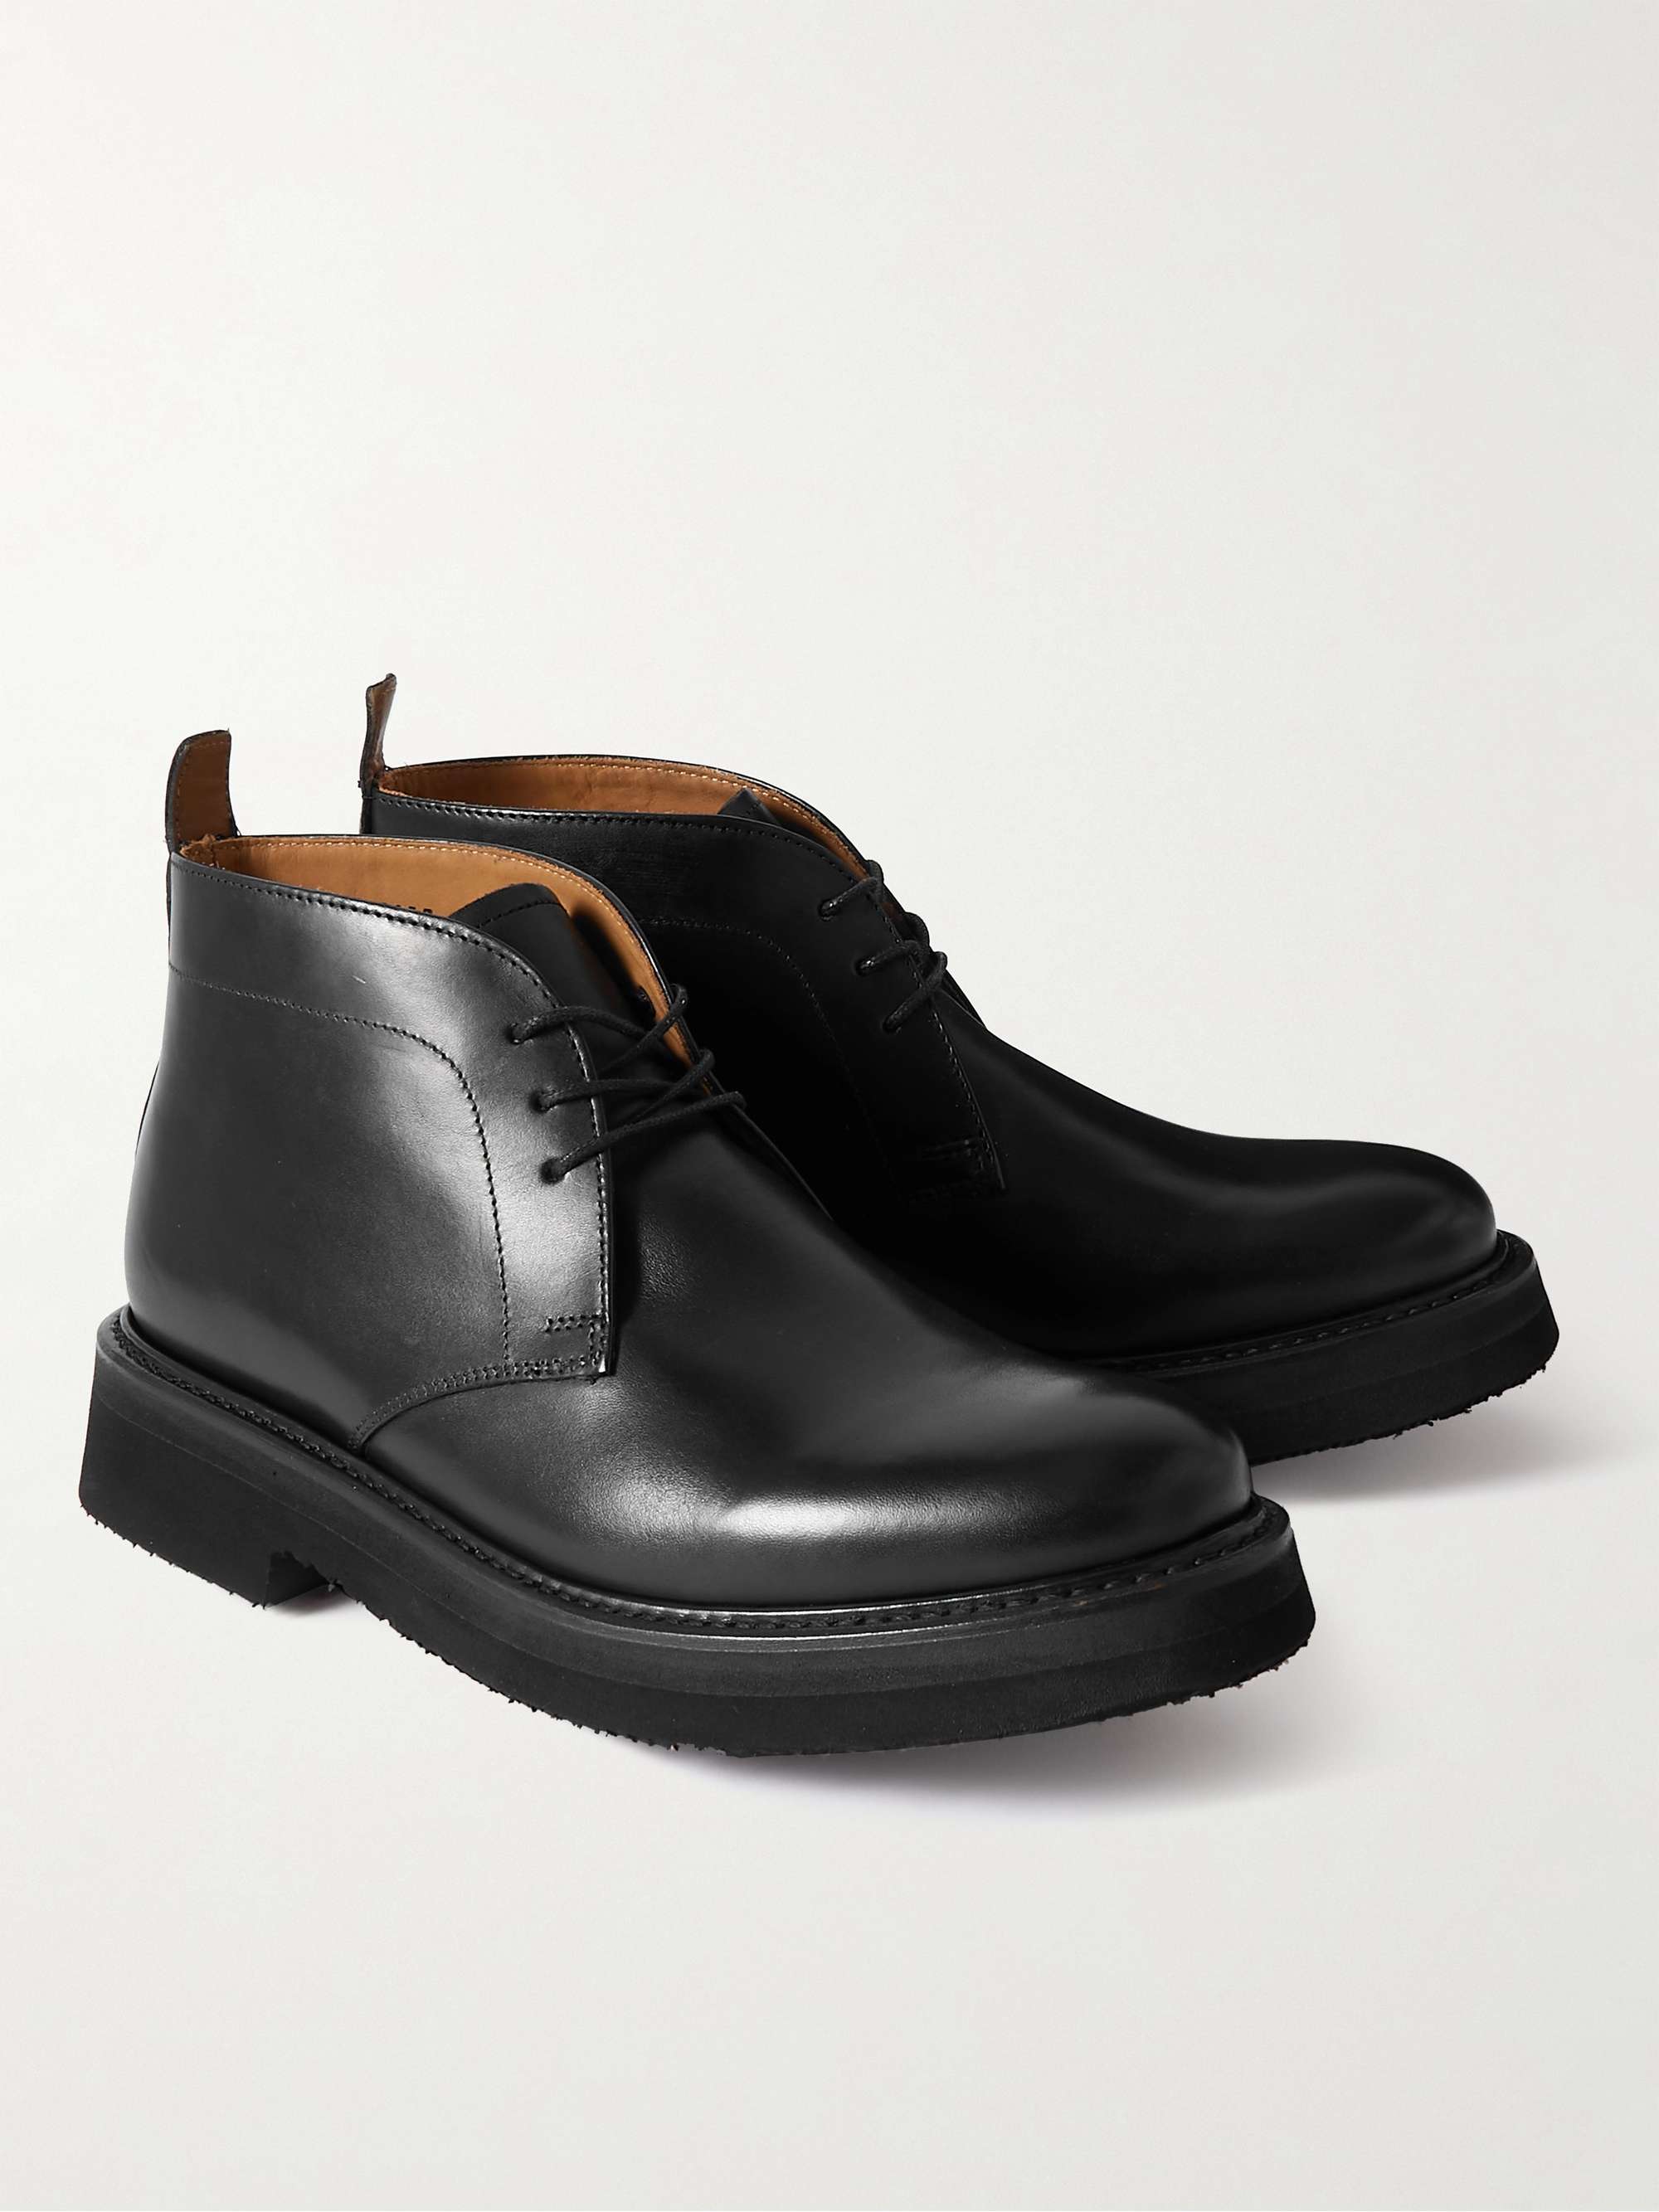 GRENSON Clement Leather Chukka Boots